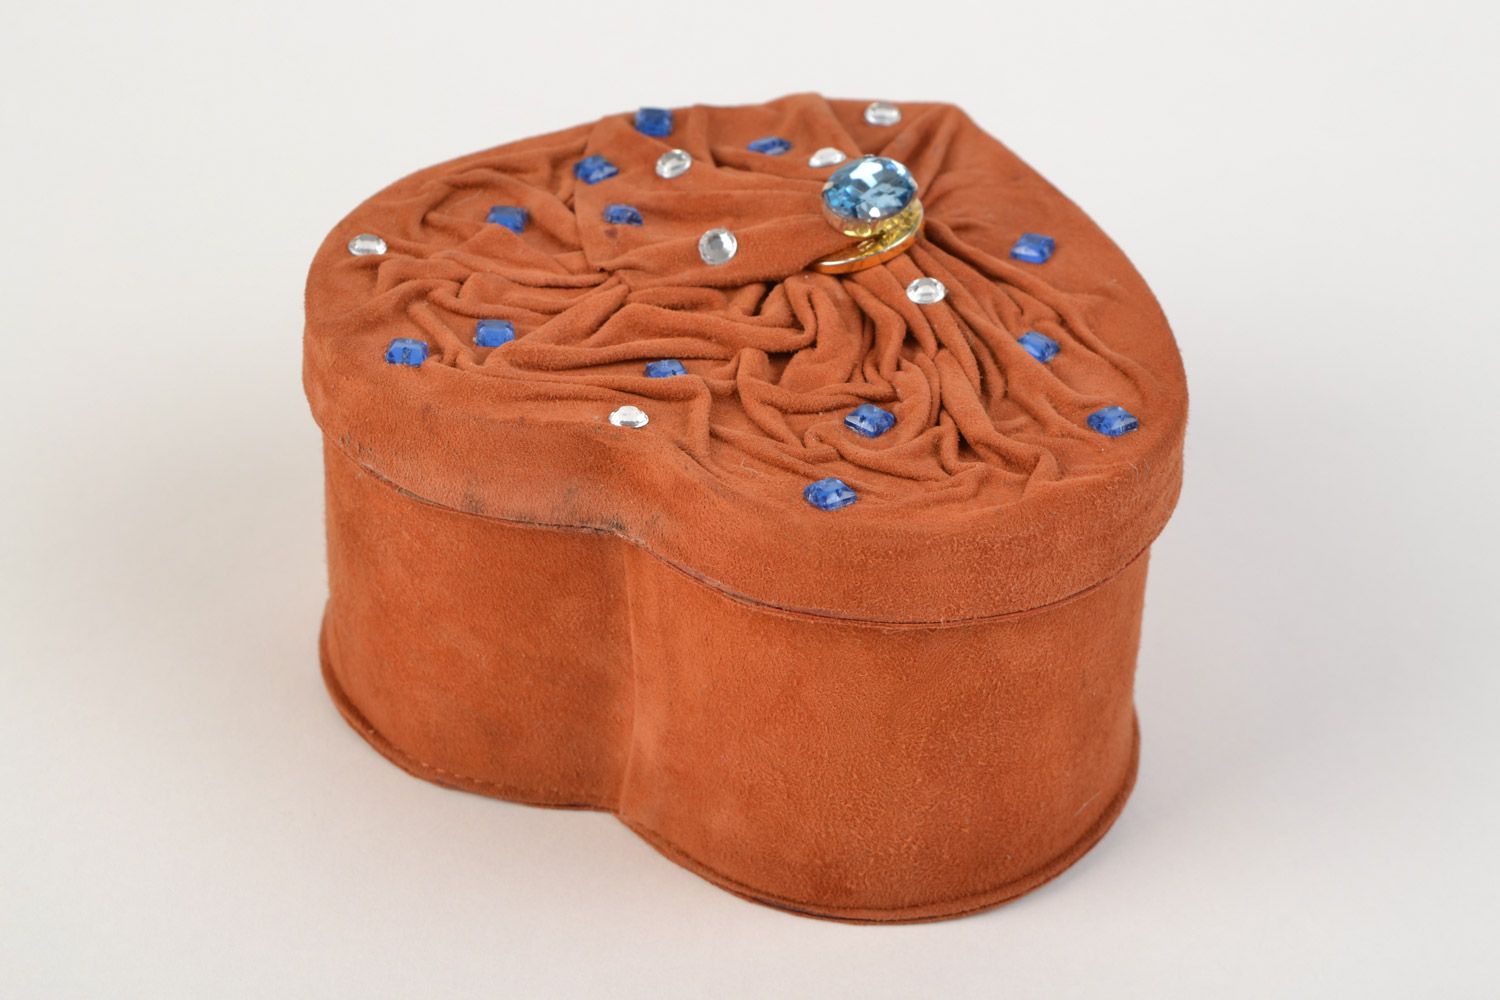 Decorative handmade heart-shaped jewelry box trimmed with leather home decor photo 5